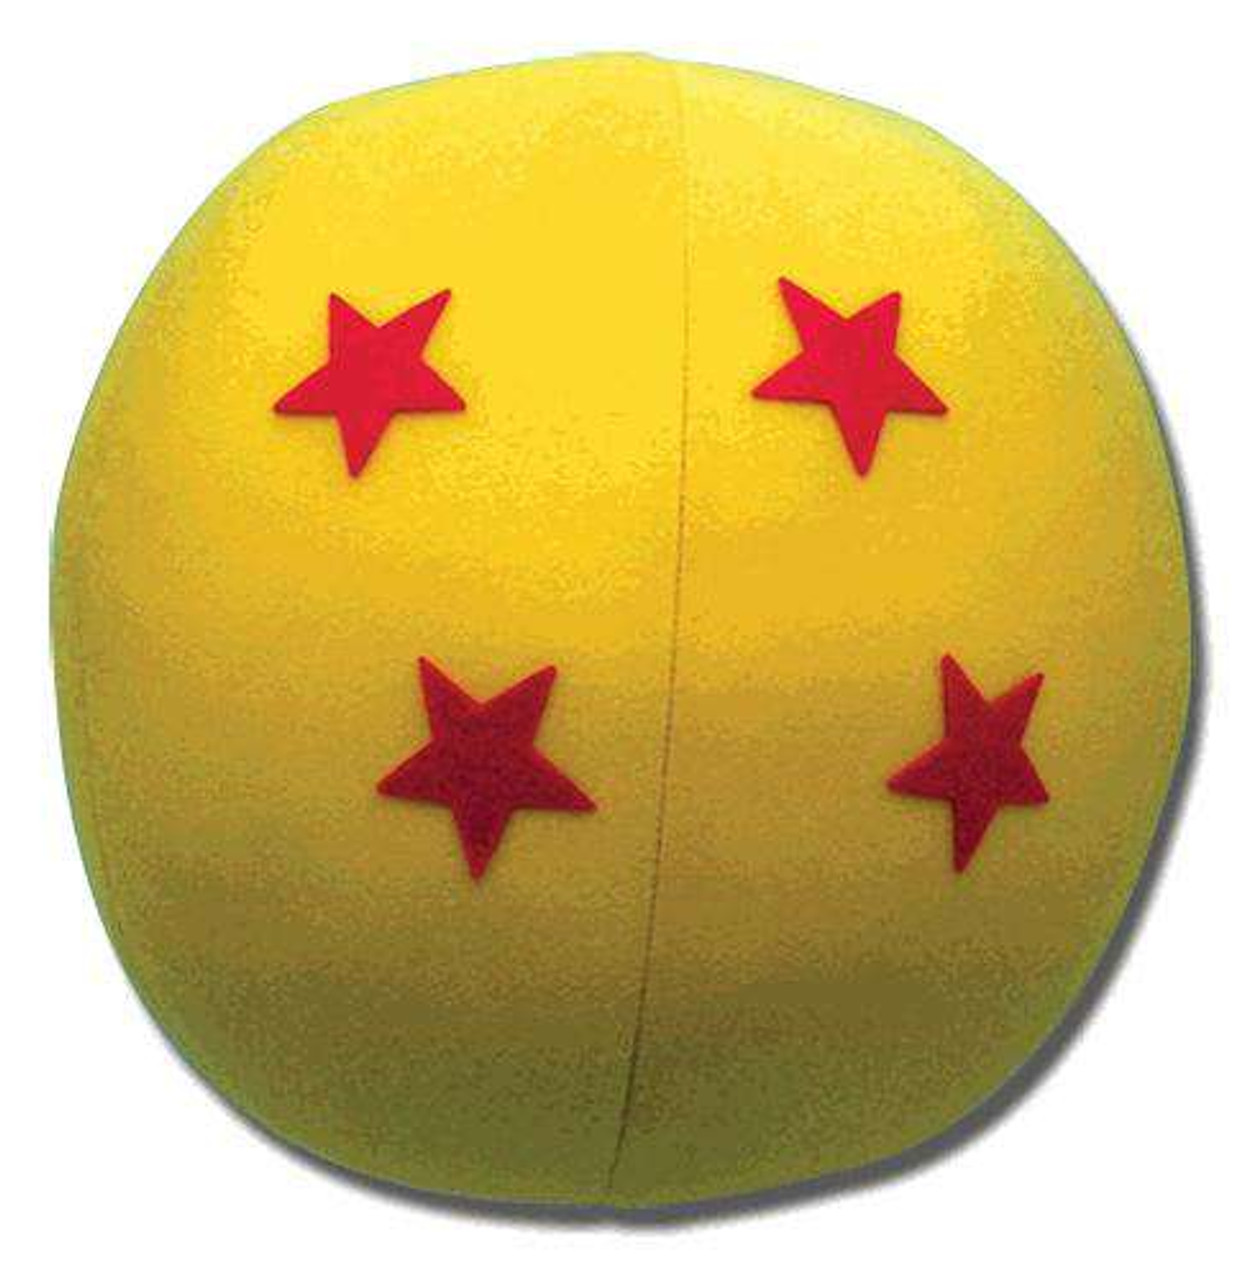 2 Star Dragon Ball Plush By Ge Animation New Dragon Ball Z Japanese Anime Collectables Dragonball Z Collectables